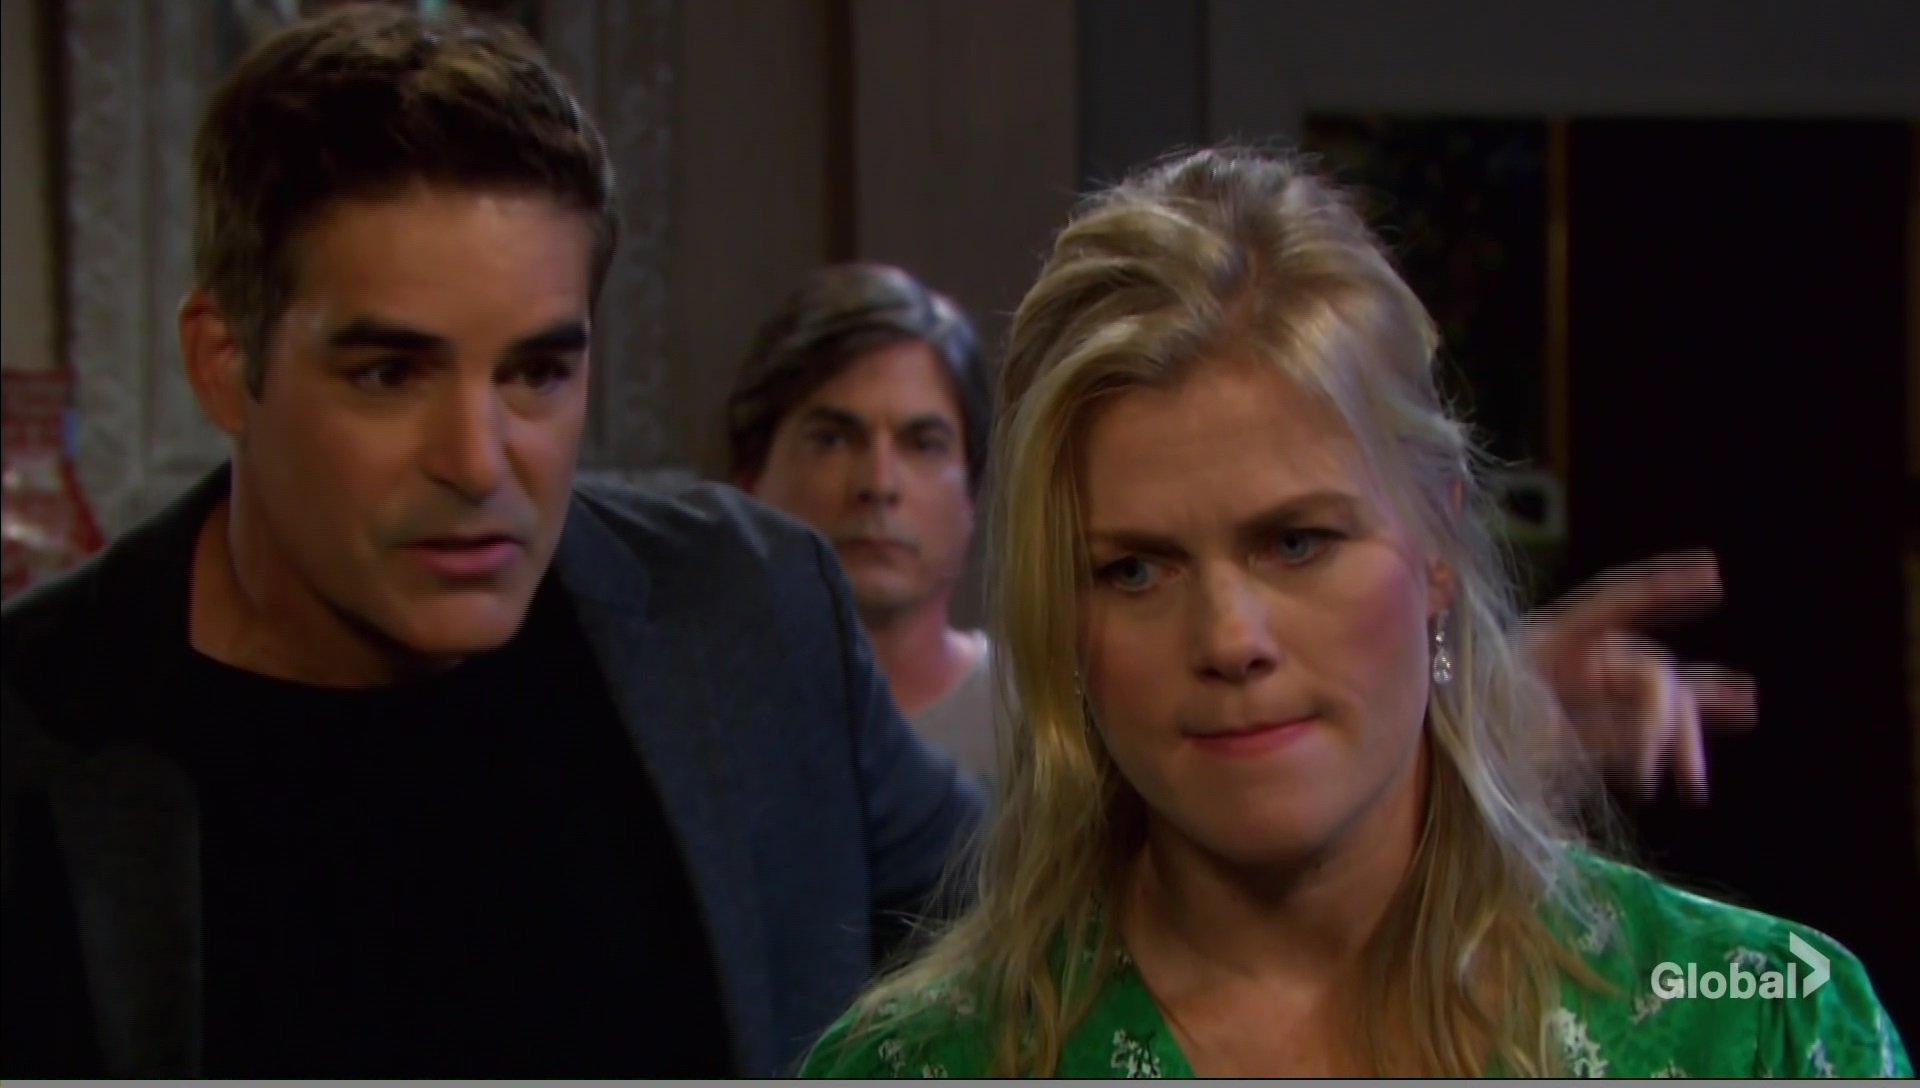 rafe accuses sami lying days of our lives